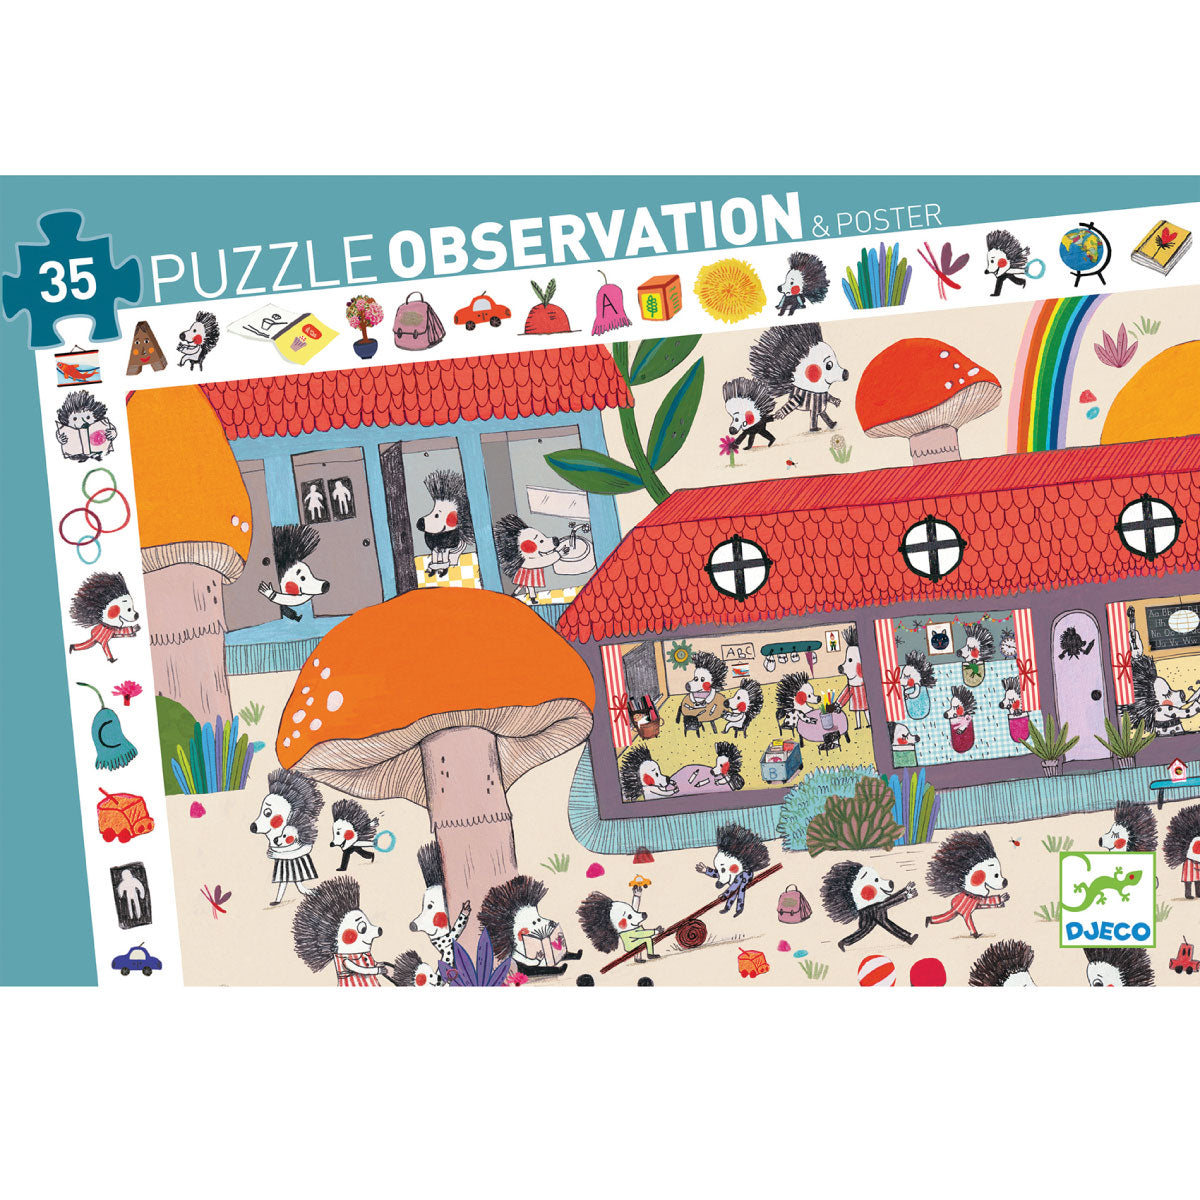 Observation Puzzle - Hedgehog School 35pc Jigsaw from Djeco